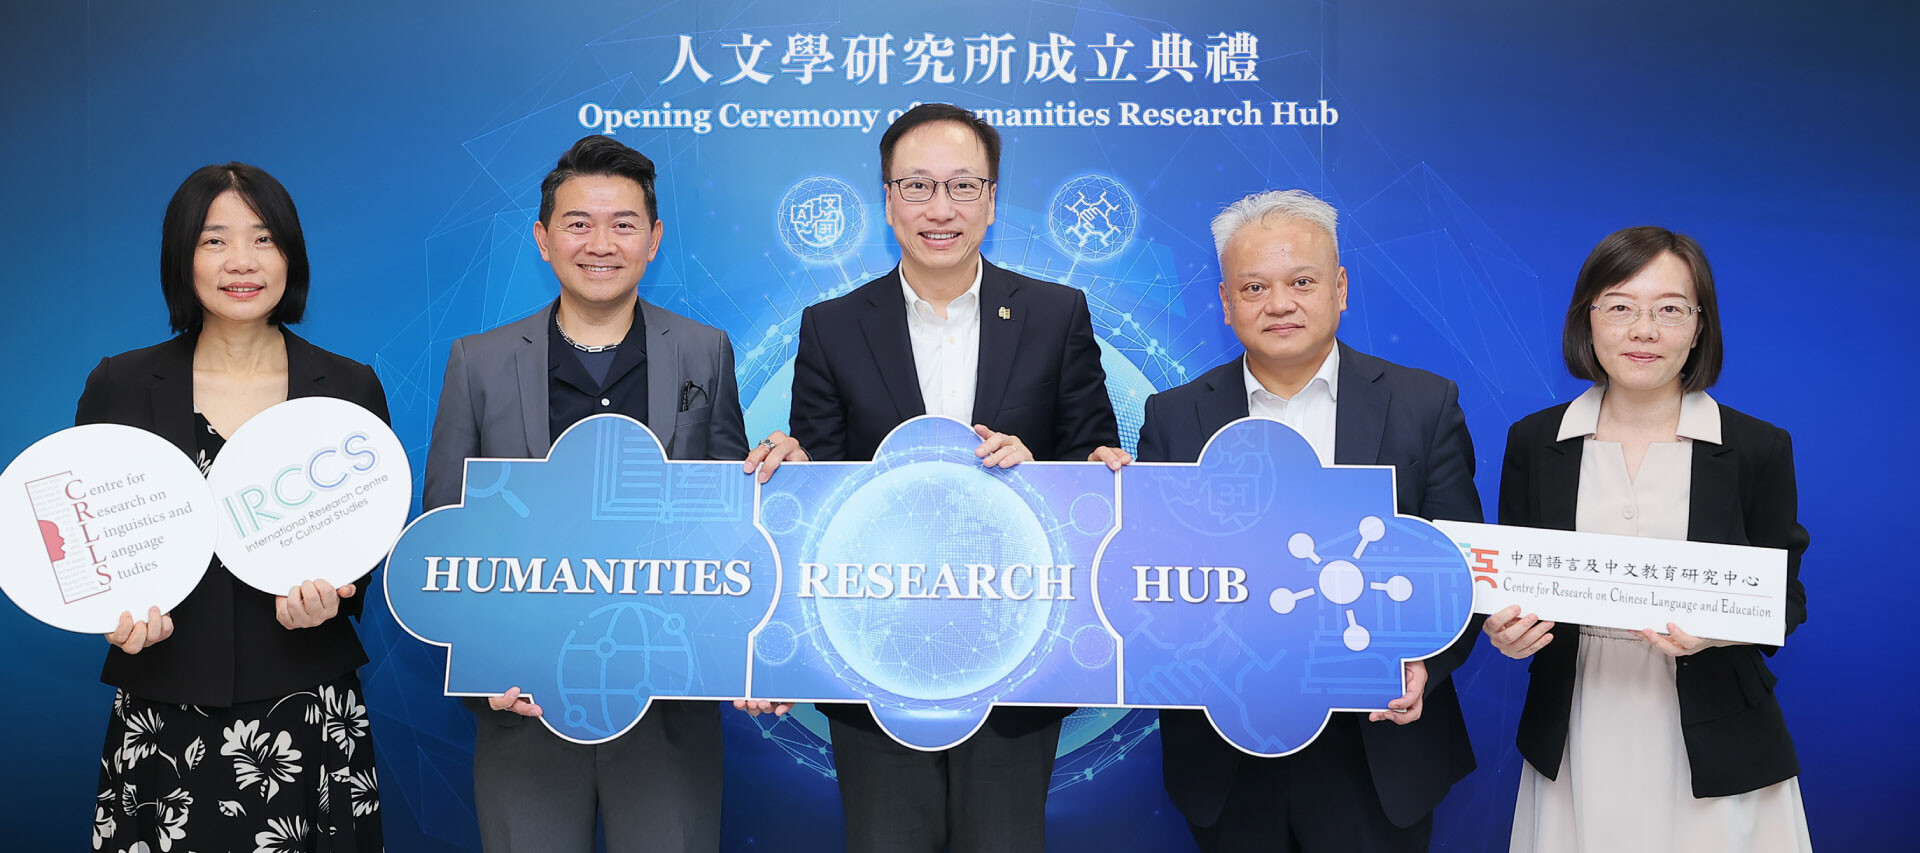 Opening Ceremony of Humanities Research Hub